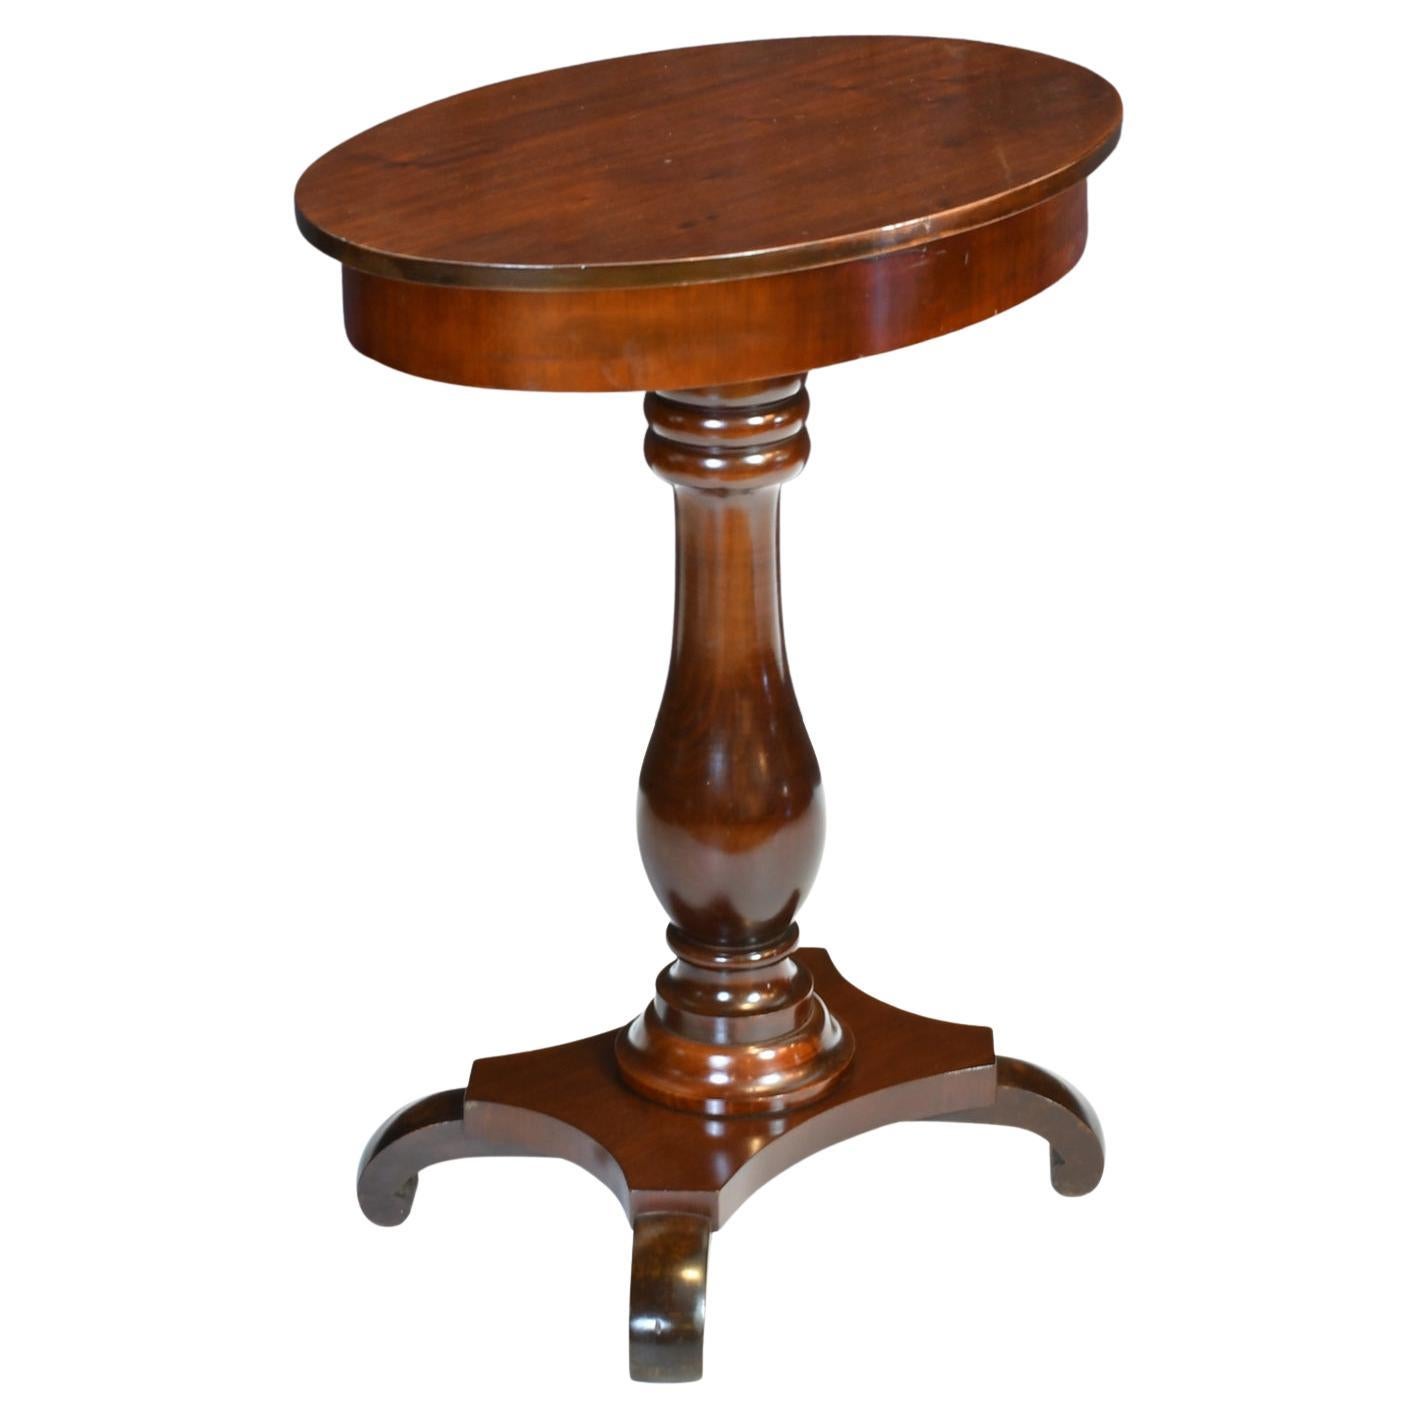 Small Antique Oval Pedestal Table or Work Table in Dark-Stained Mahogany For Sale 1